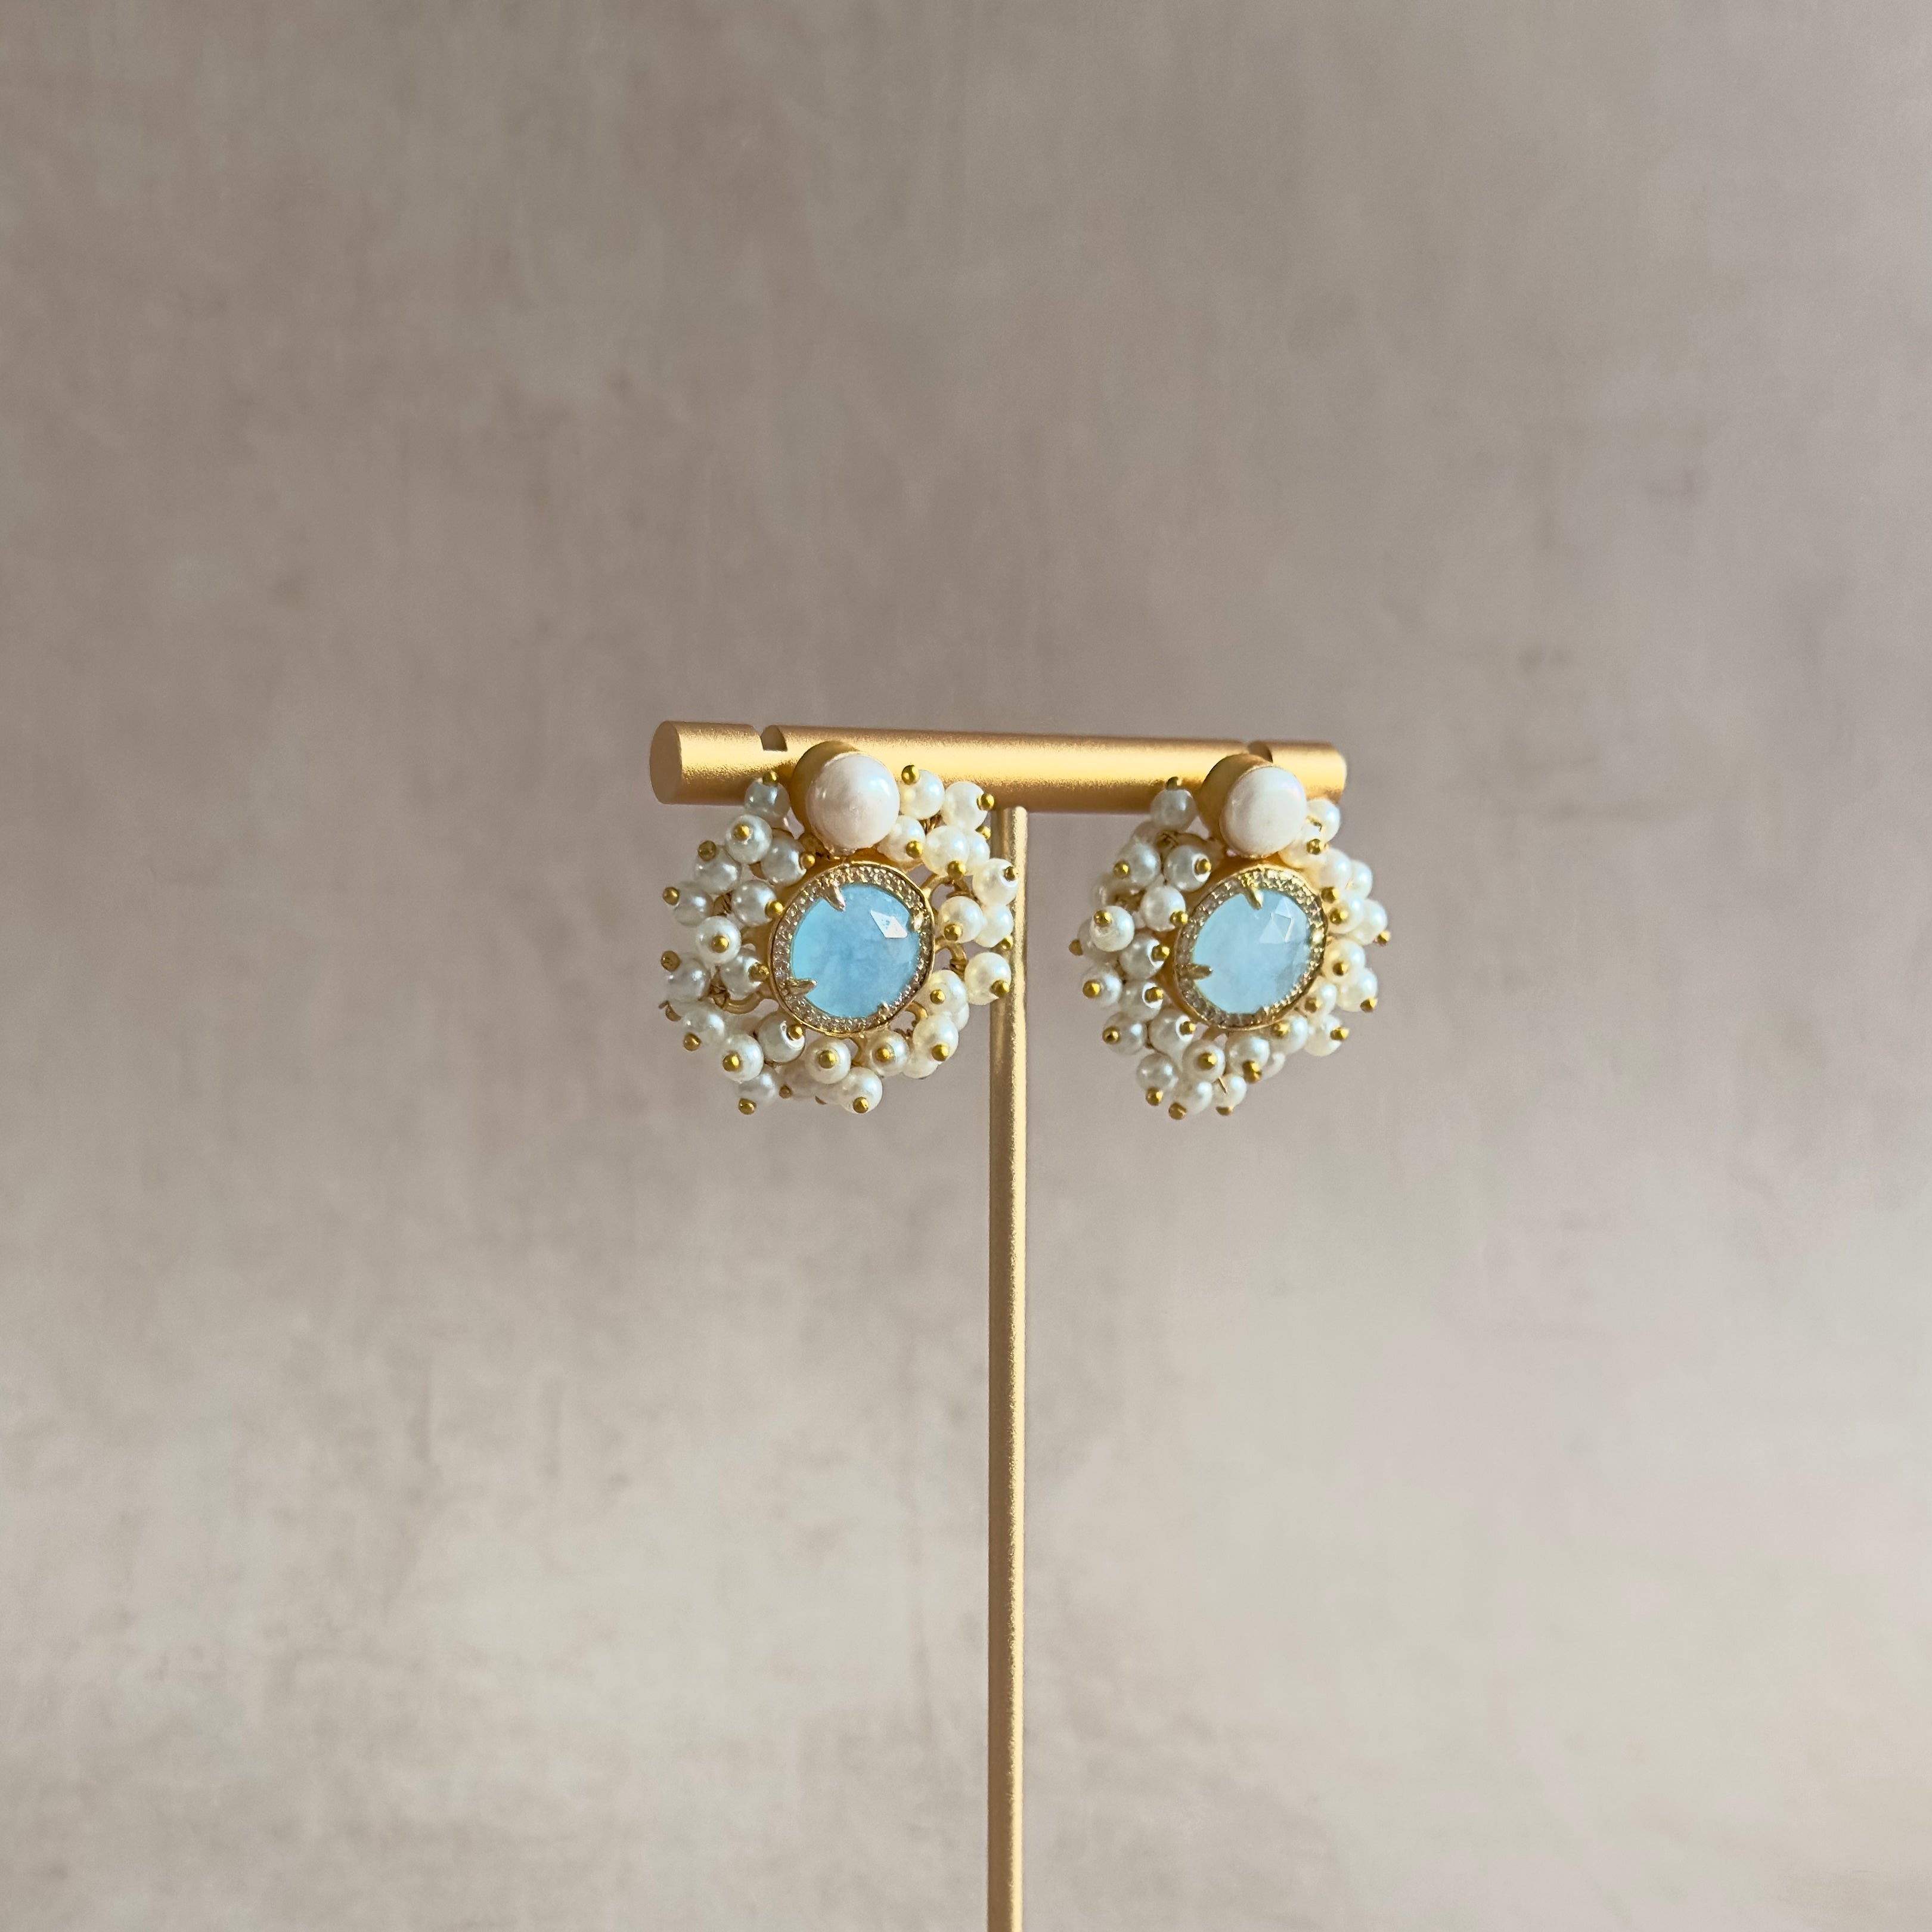 Introducing the elegant Amal Blue Stud Earrings! These classic stud earrings feature a delicate pearl accent and a stunning baby blue crystal, exuding timeless beauty and sophistication. Elevate any look with these must-have earrings.